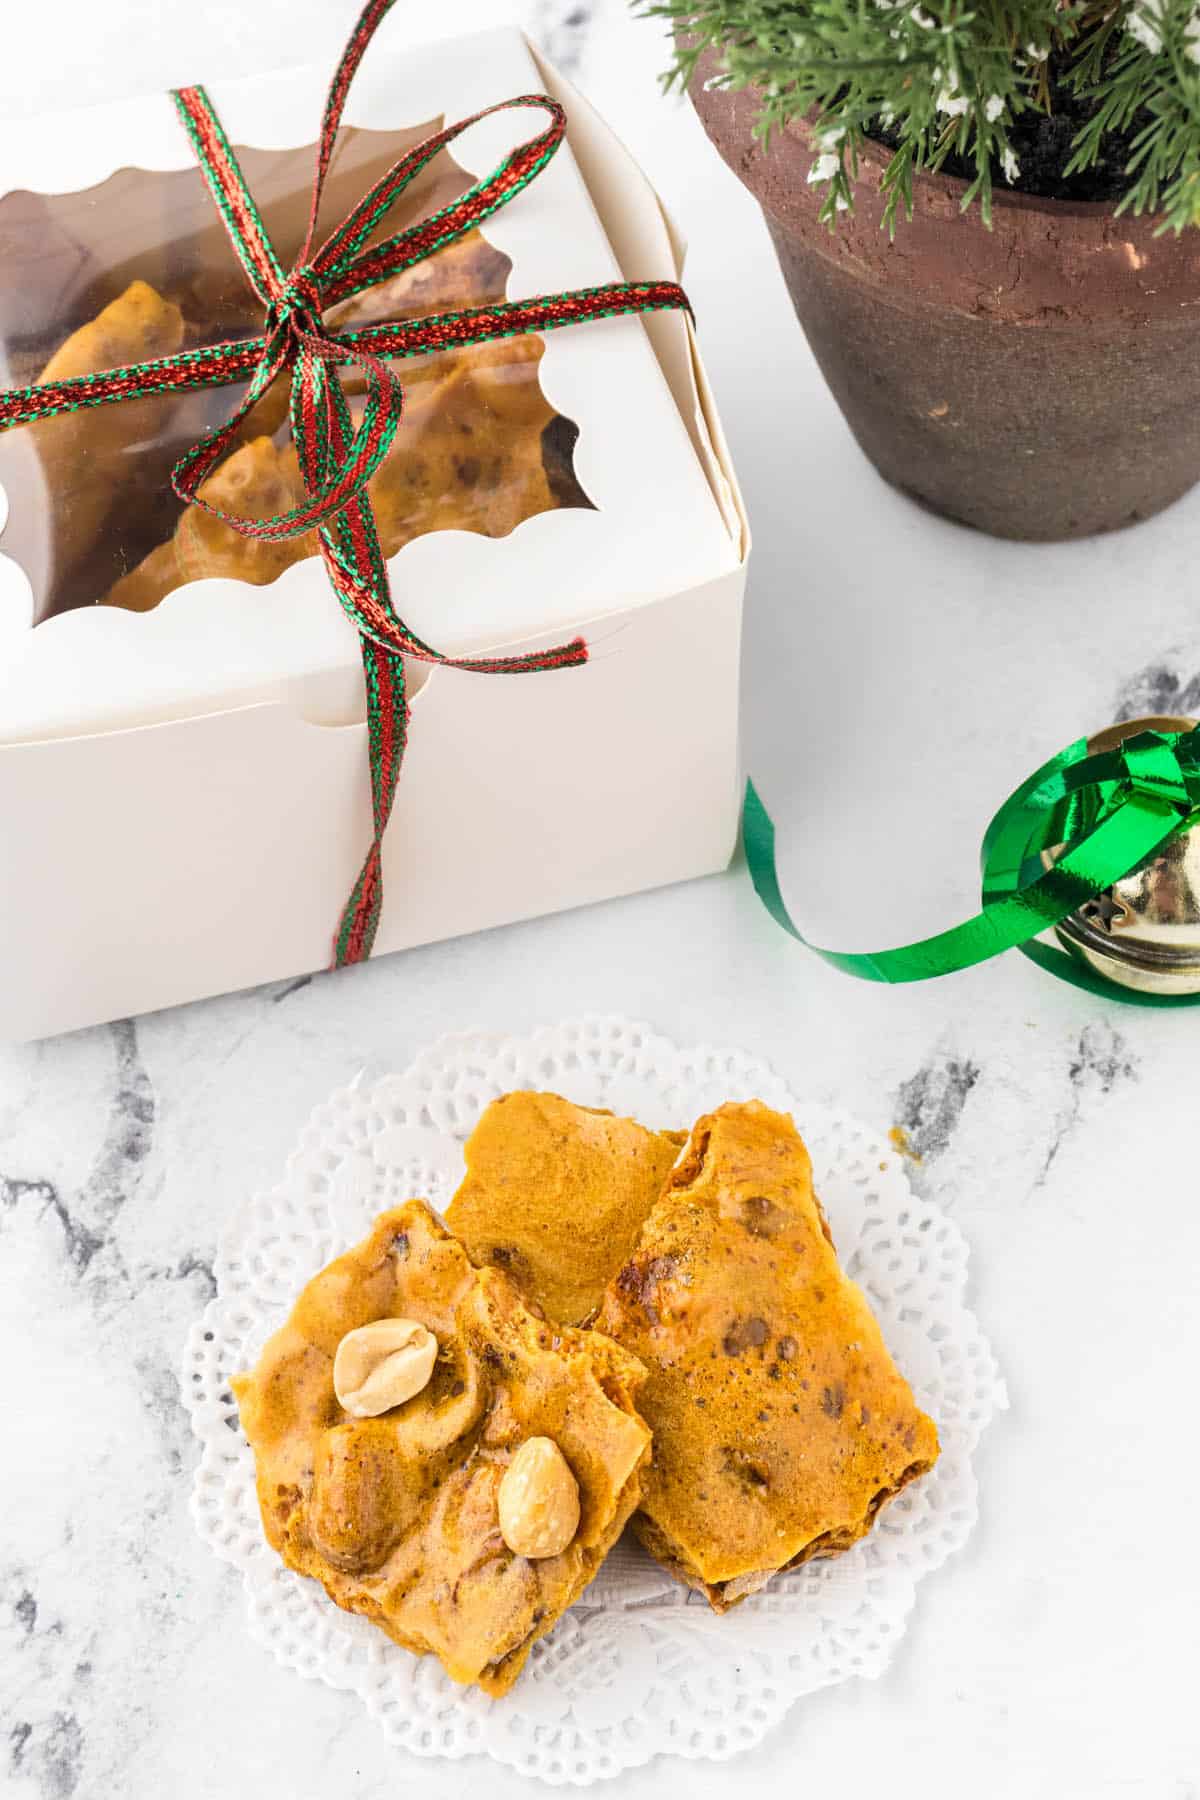 Peanut brittle packaged as a gift and a small platter filled with candy.